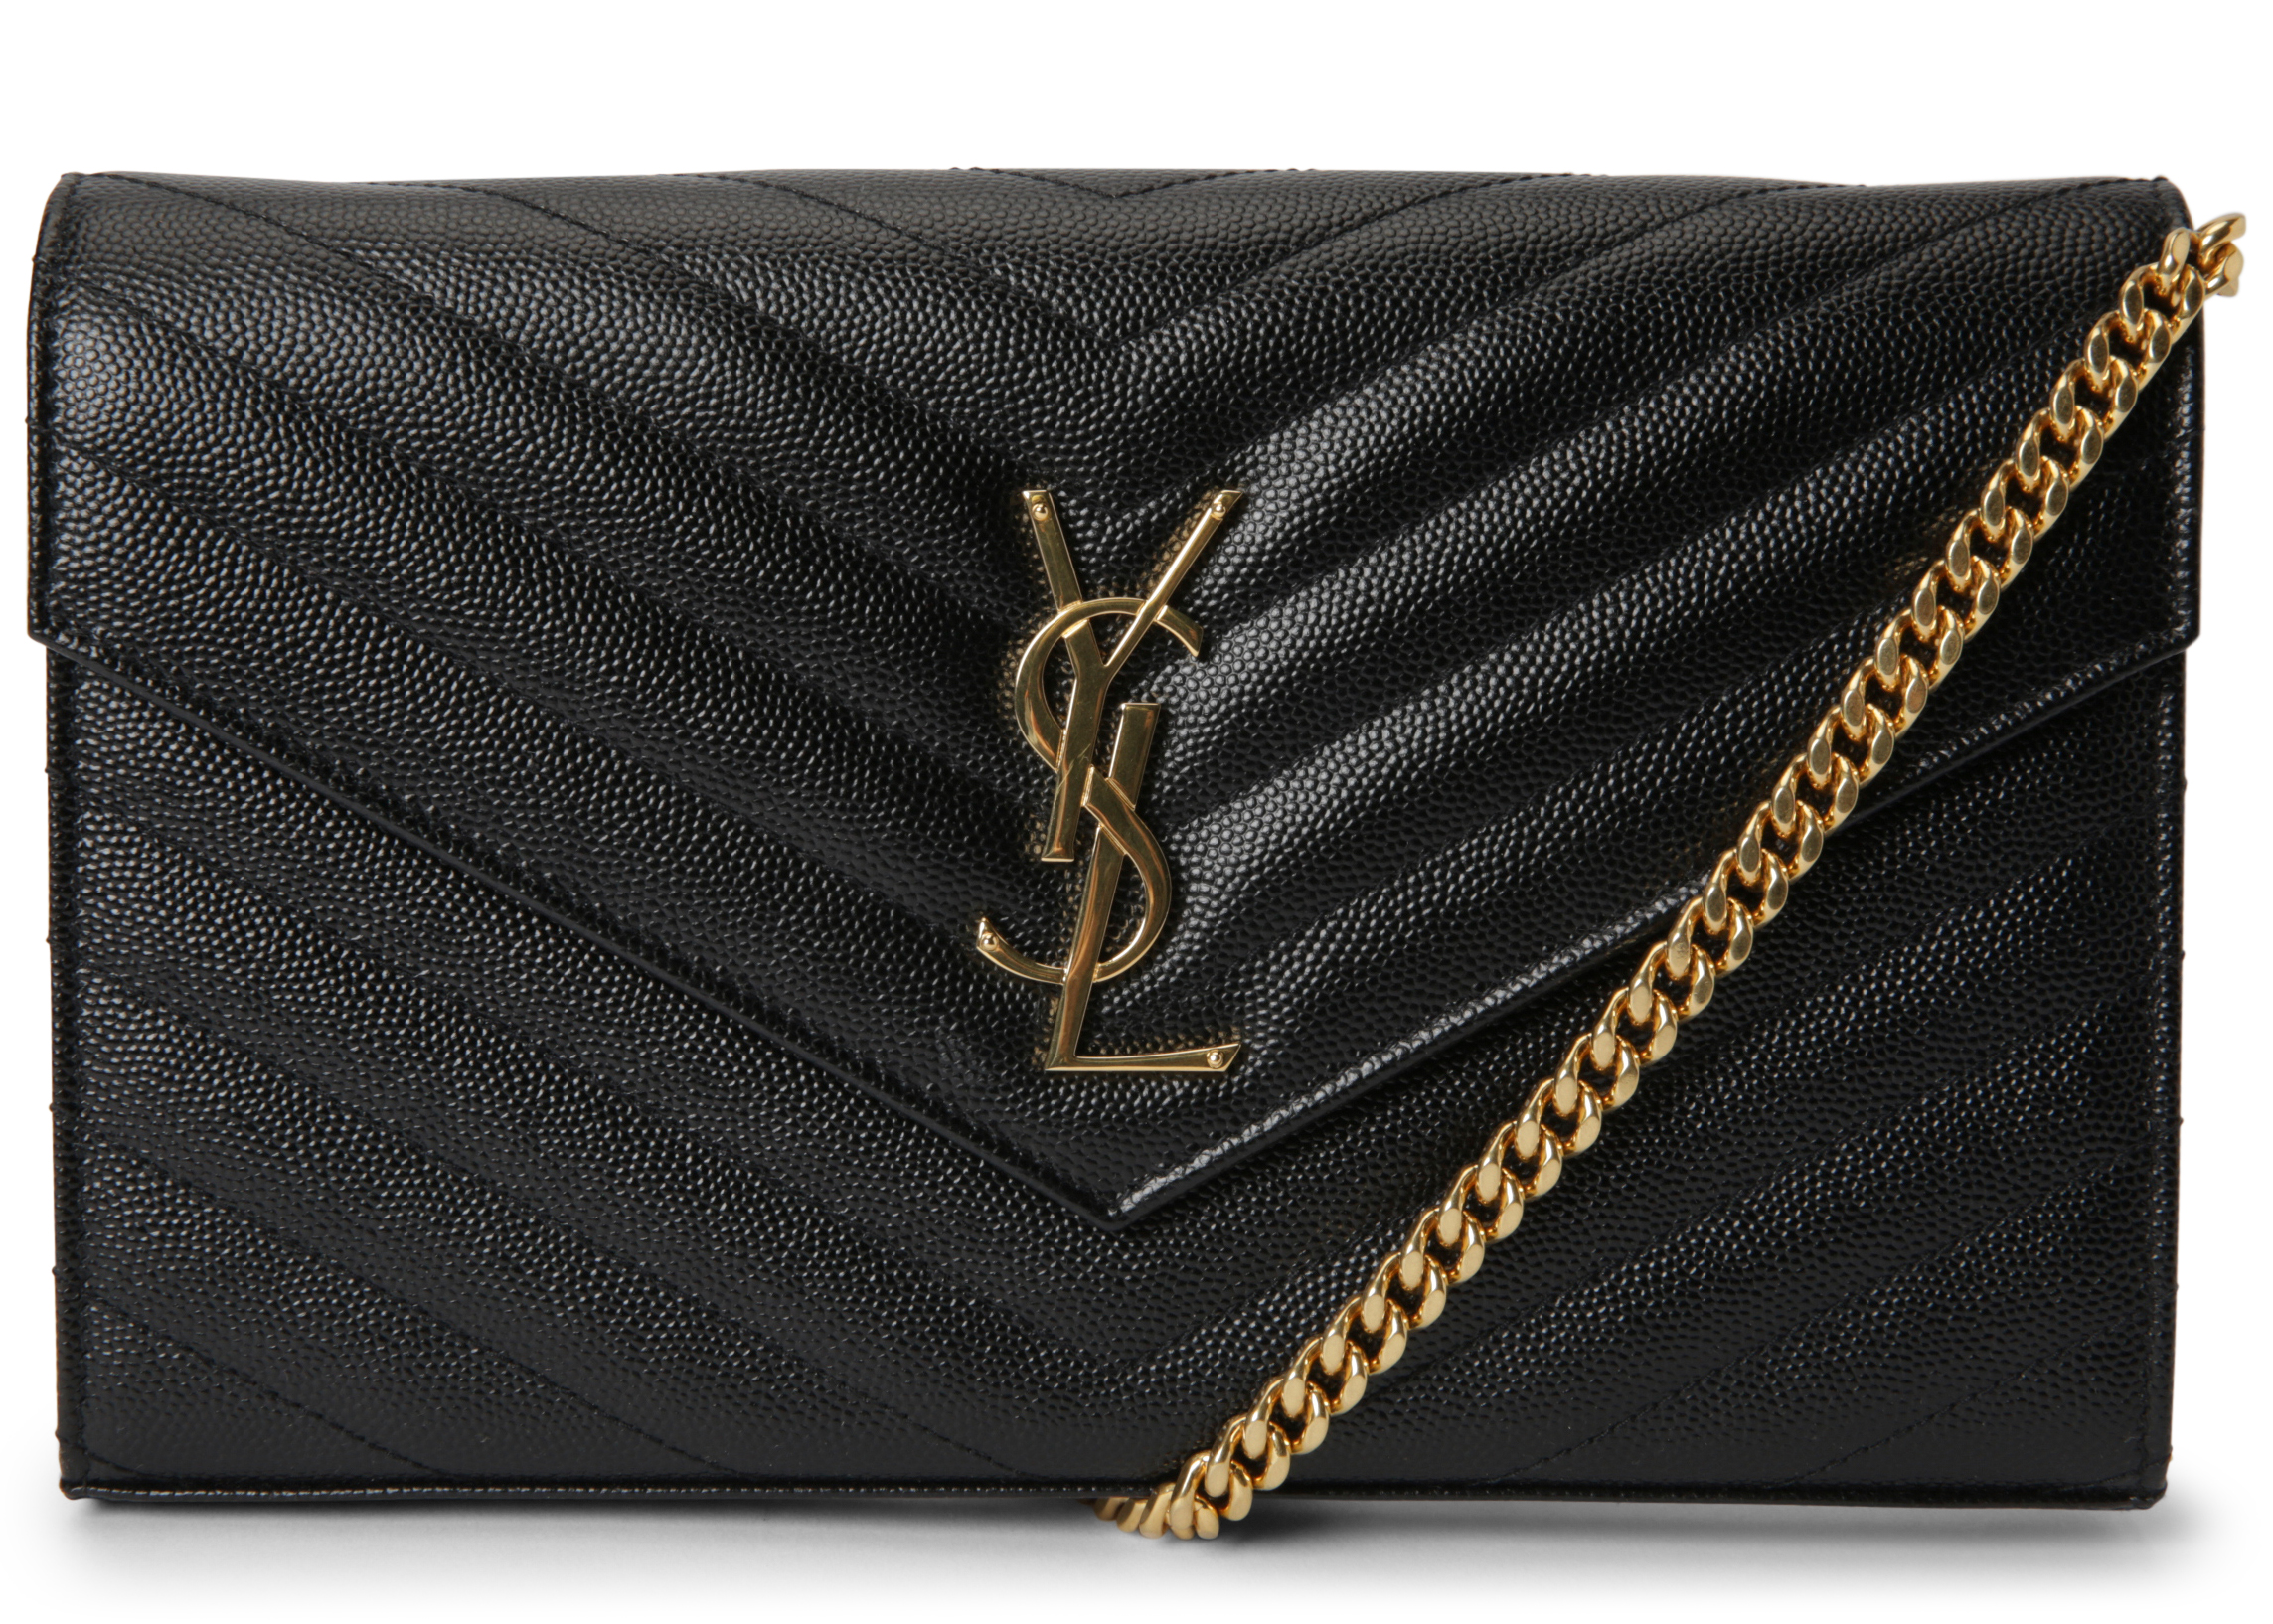 ysl clutch bag - Bags and purses